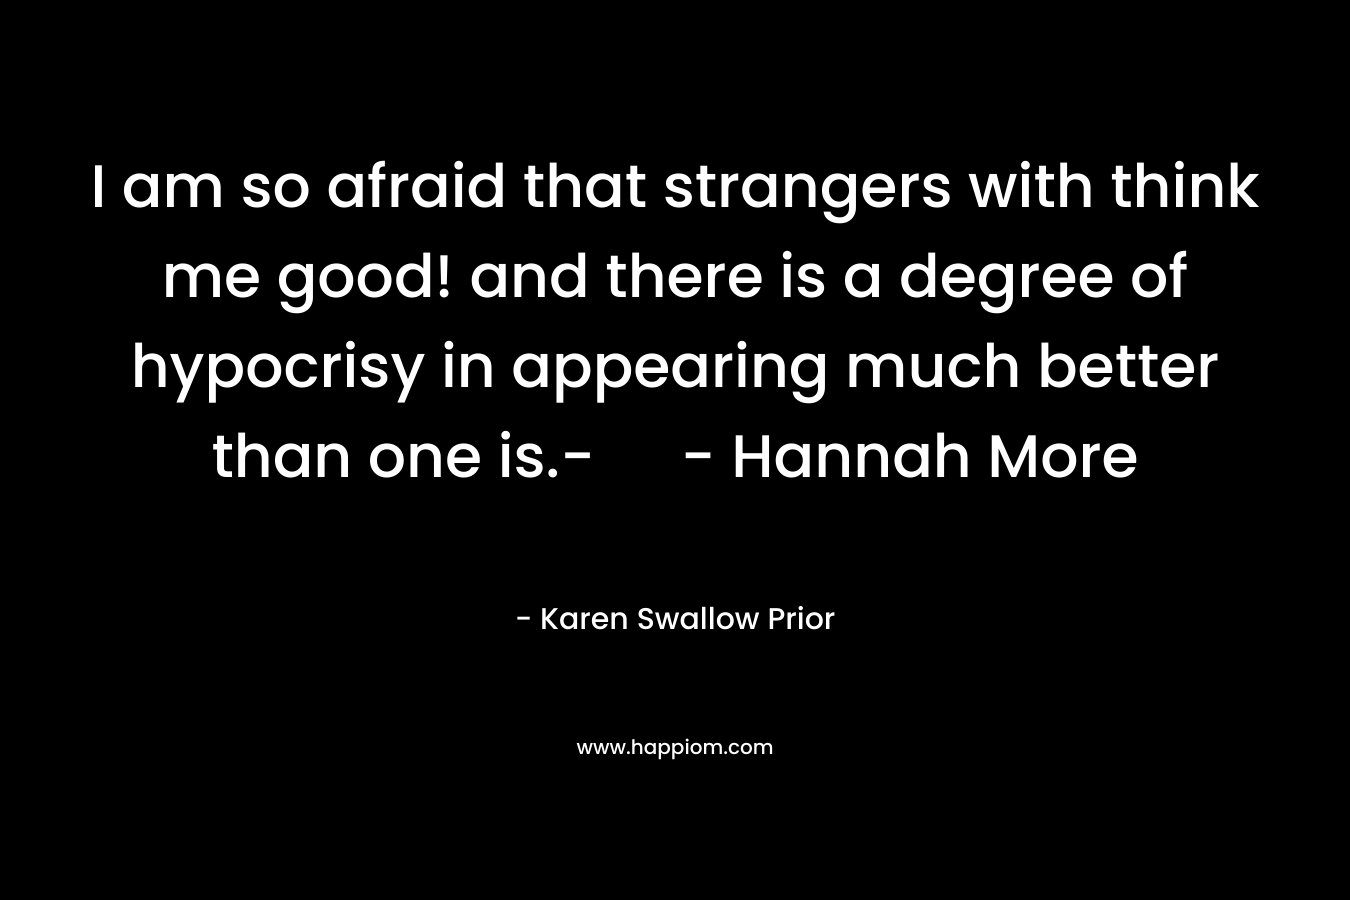 I am so afraid that strangers with think me good! and there is a degree of hypocrisy in appearing much better than one is.- - Hannah More